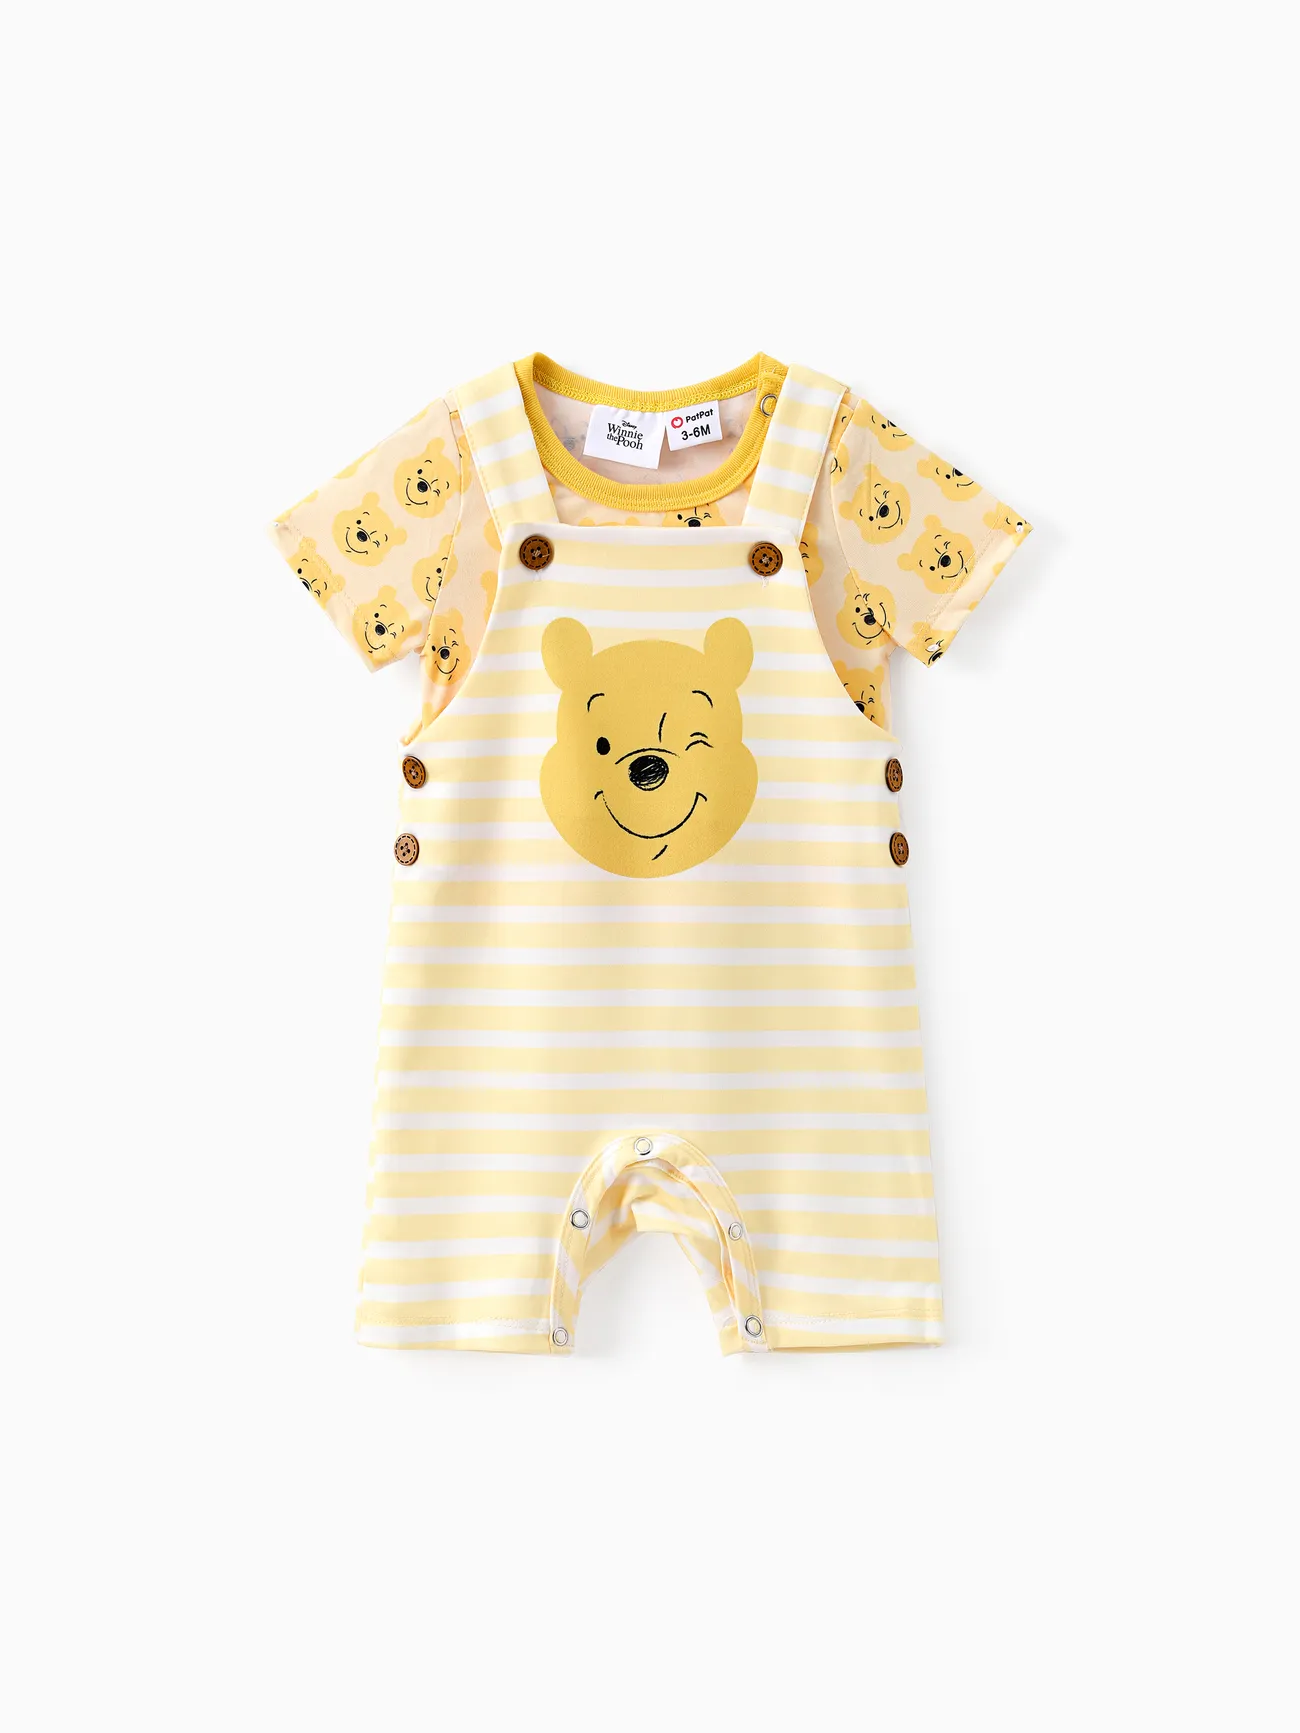 Disney Winnie the Pooh Baby Boys/Girls 2pcs Naia™ Character All-over Print Tee with Striped Overall Set LightYellow big image 1